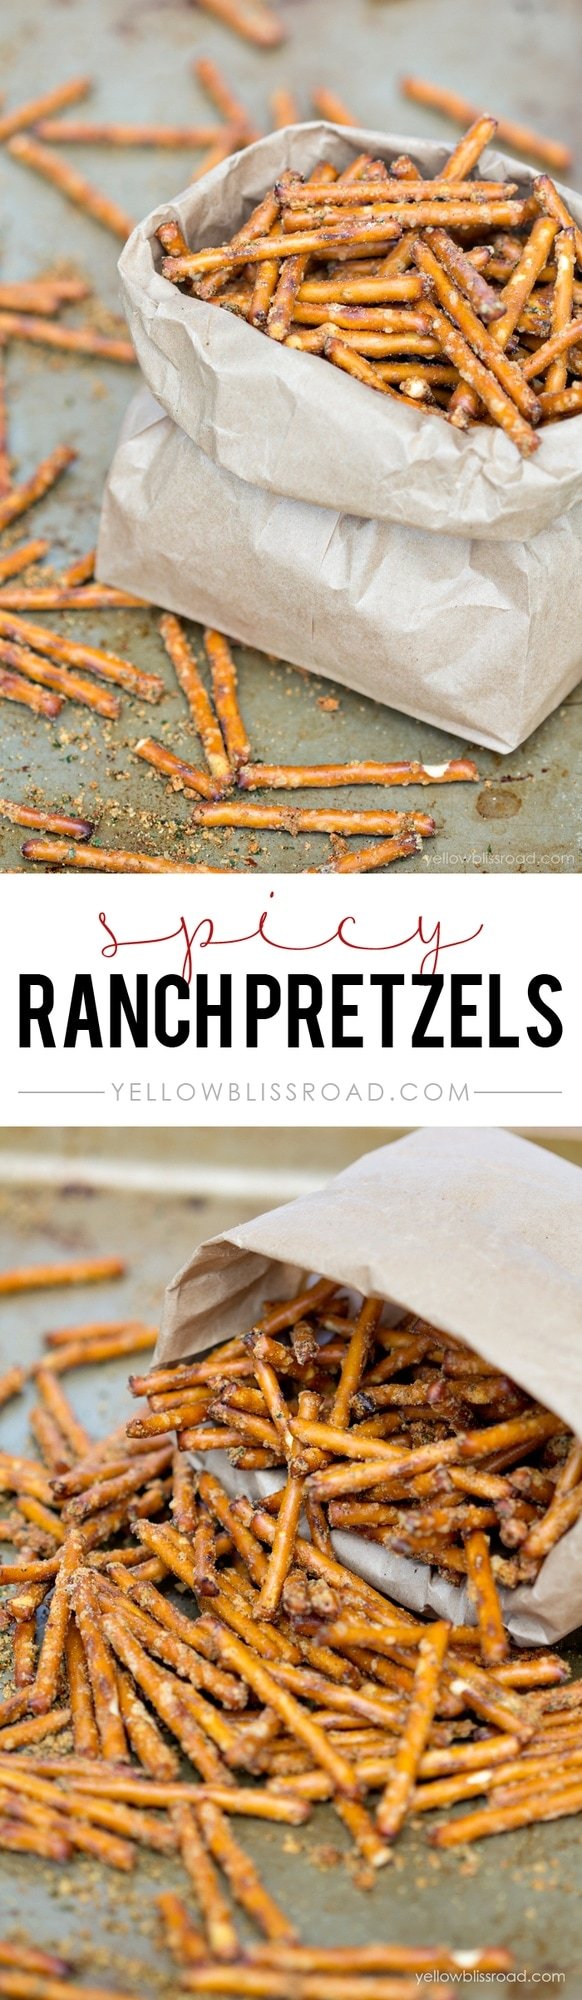 Spicy Ranch Flavored Pretzels - A quick and easy snack